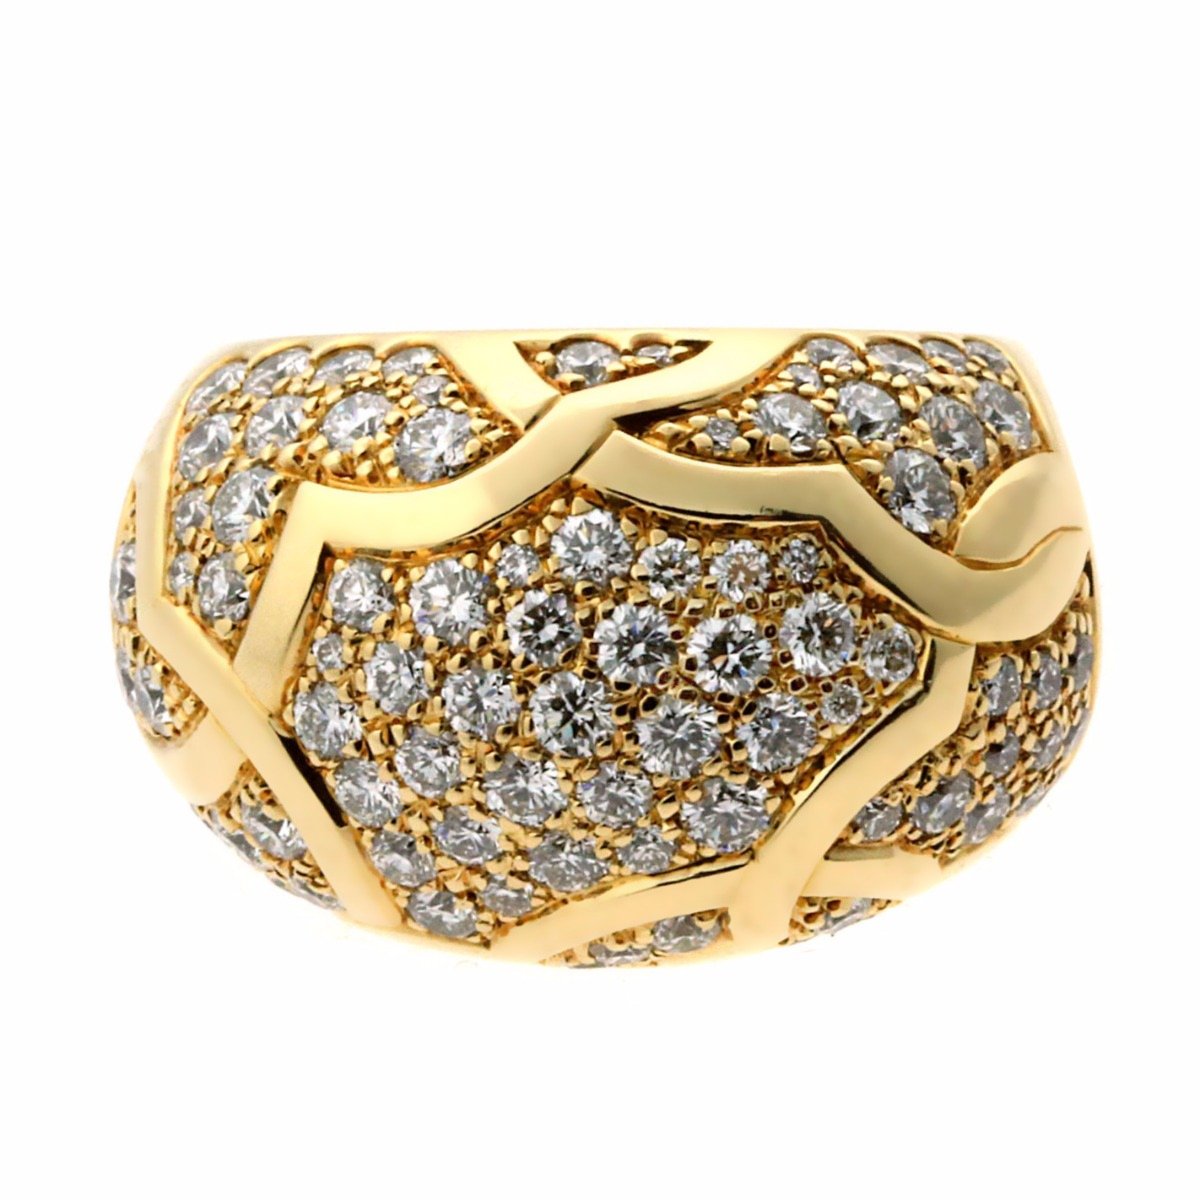 Chanel Camellia Flower Diamond Yellow Gold Bombe Cocktail Ring